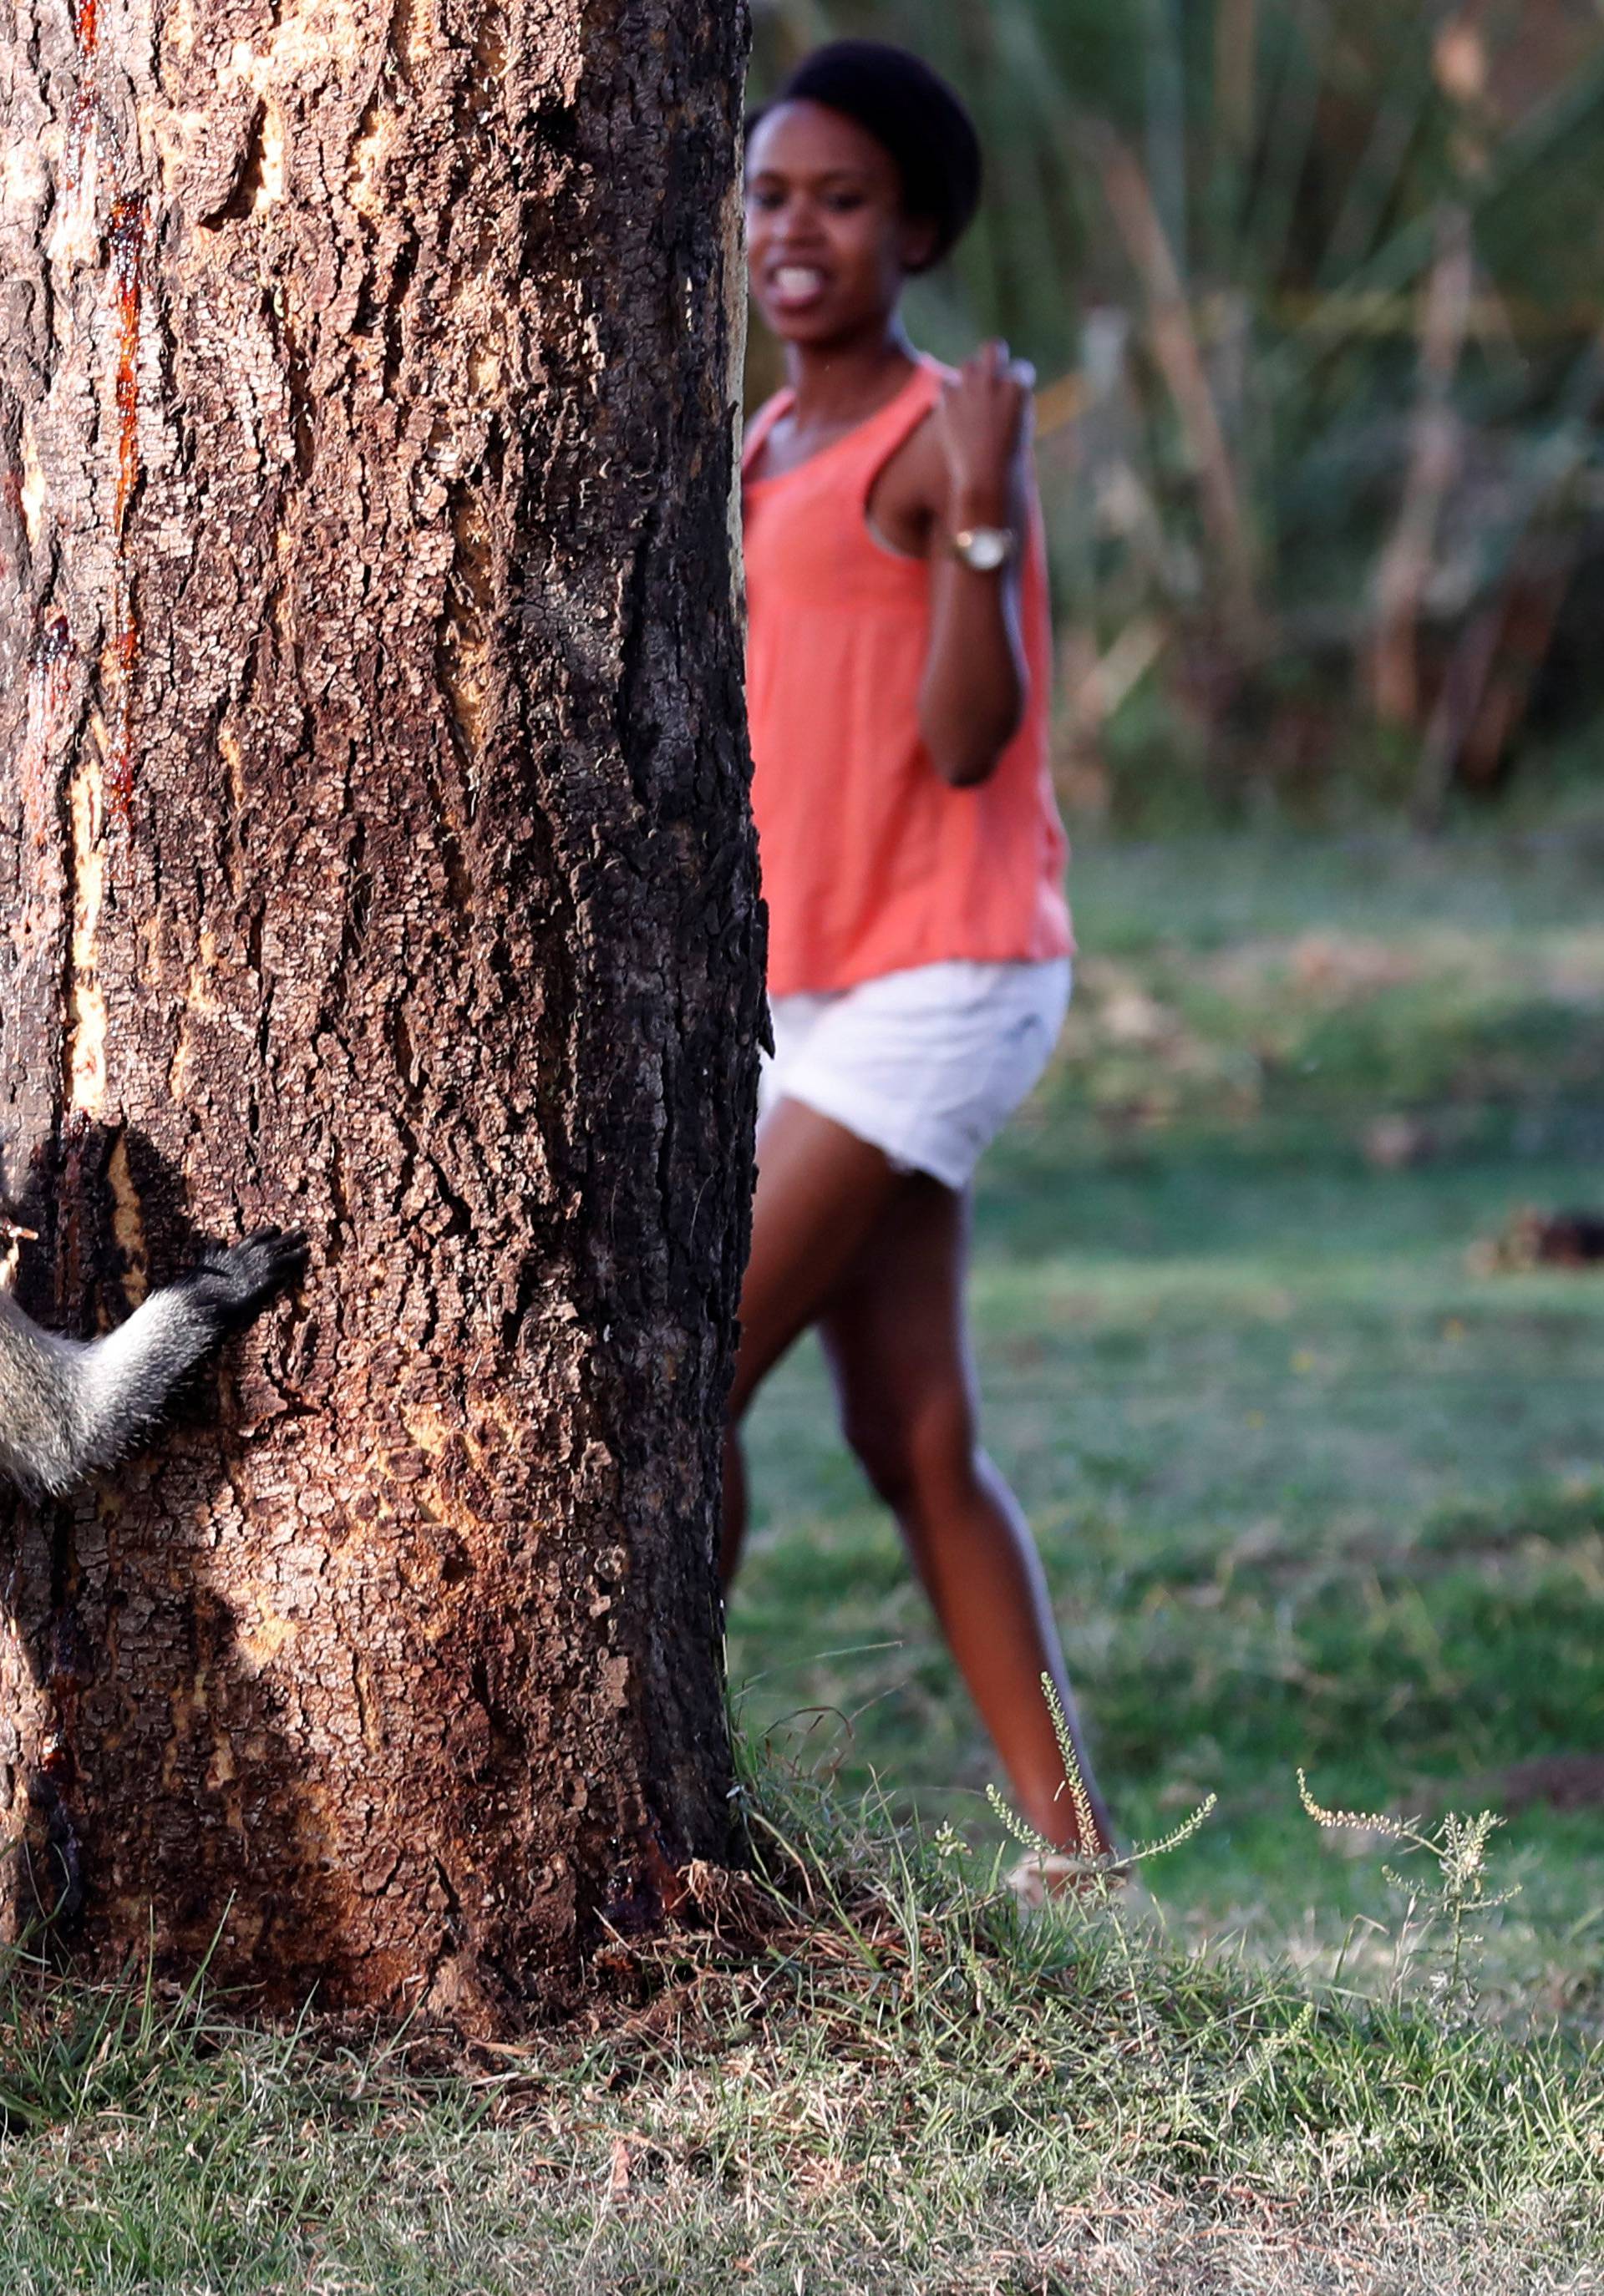 A woman passes in front of a vervet monkey on the shores of lake Naivasha